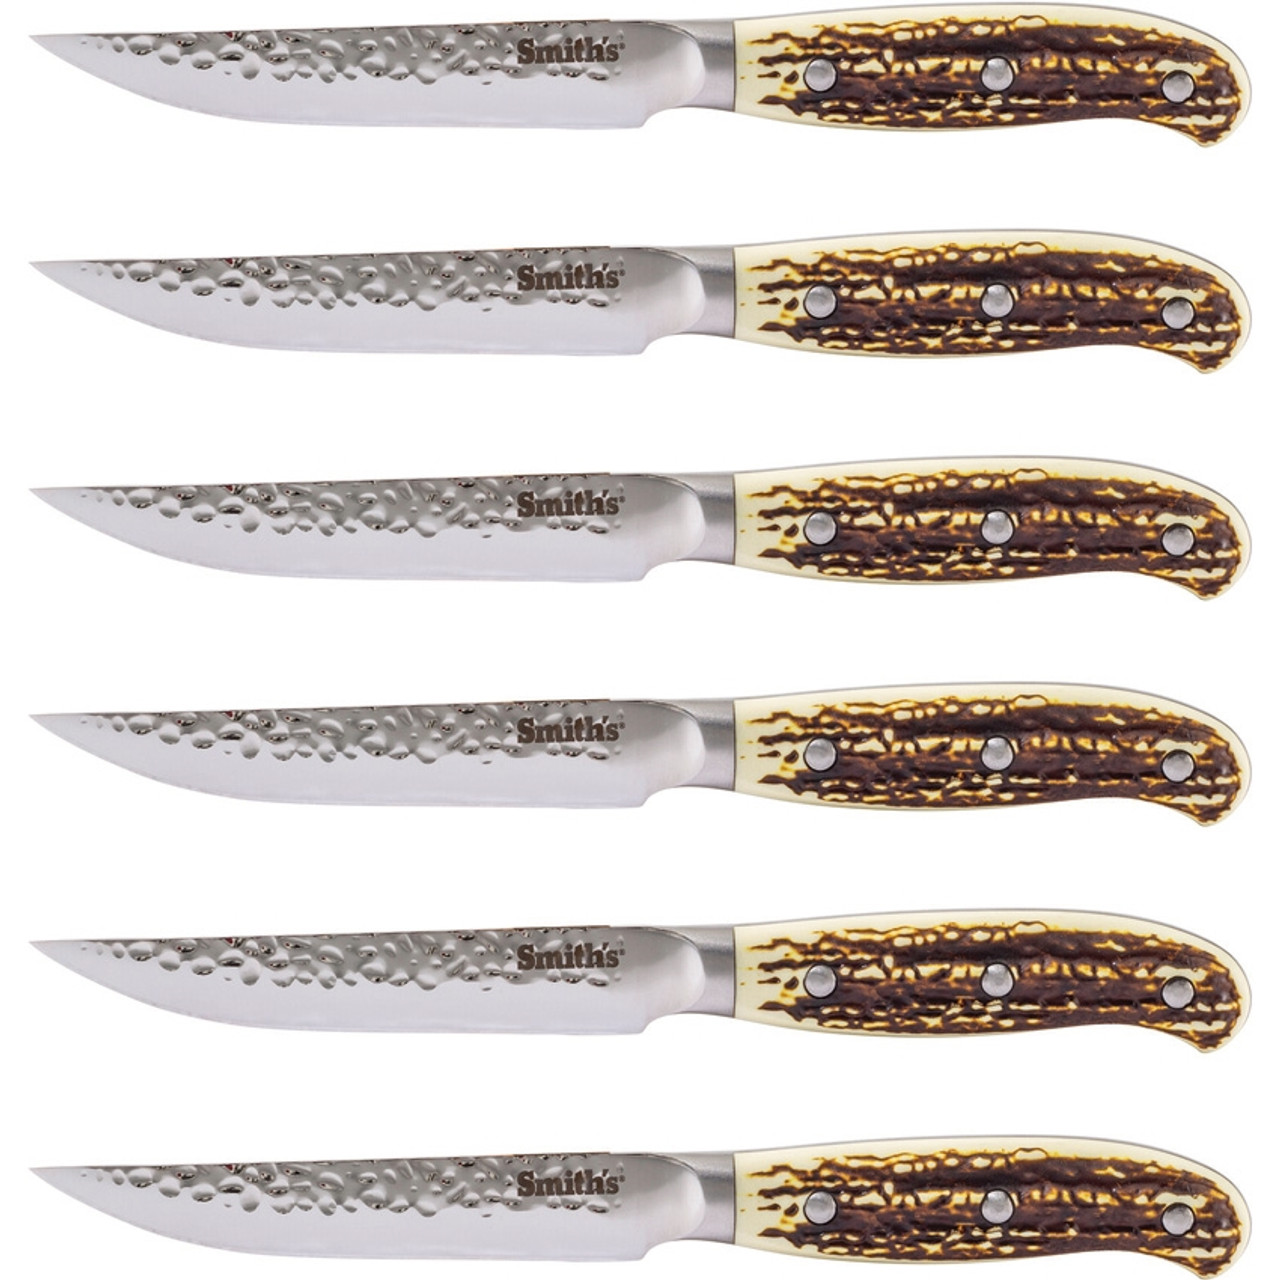 Smith's Sharpeners Cabin & Lodge Steak Set - Brown Stag (4.5" 420 SS Hammered) 51033